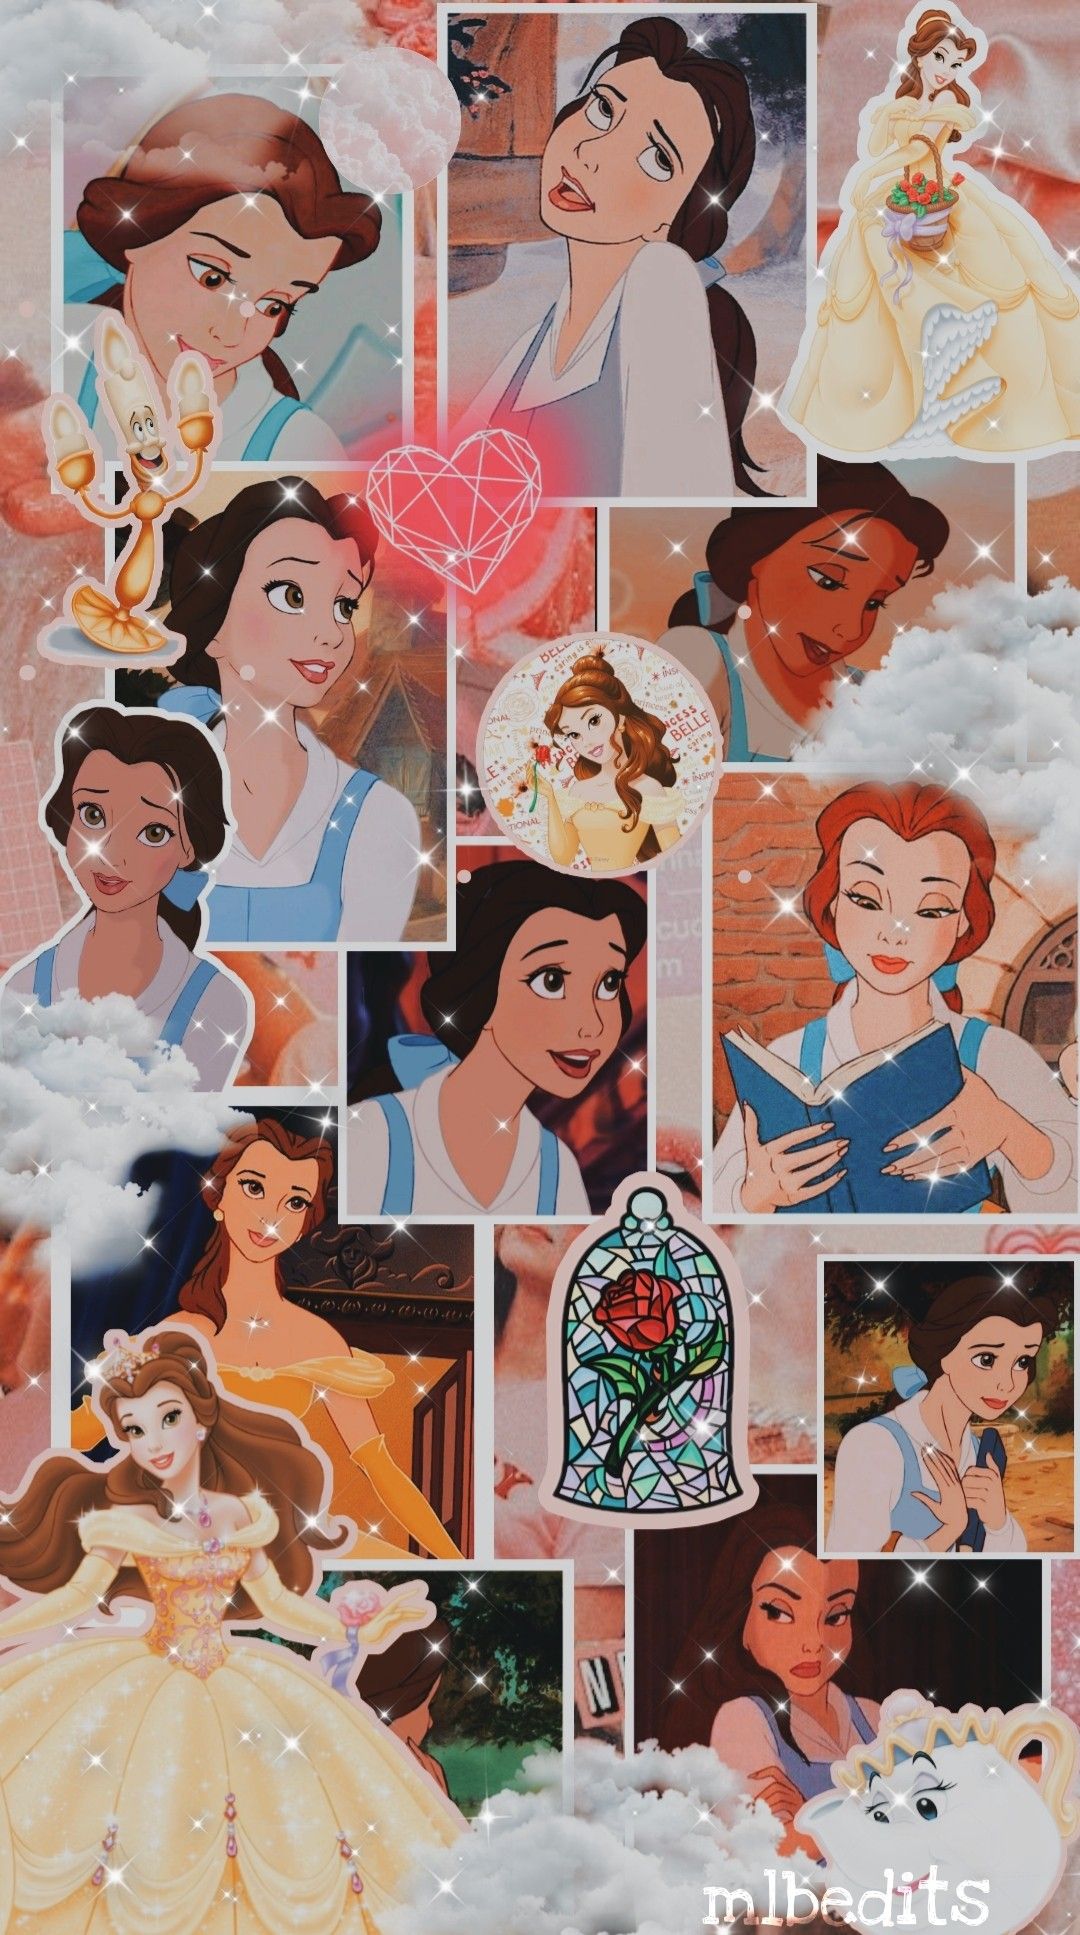 A collage of disney princesses with different images - Belle